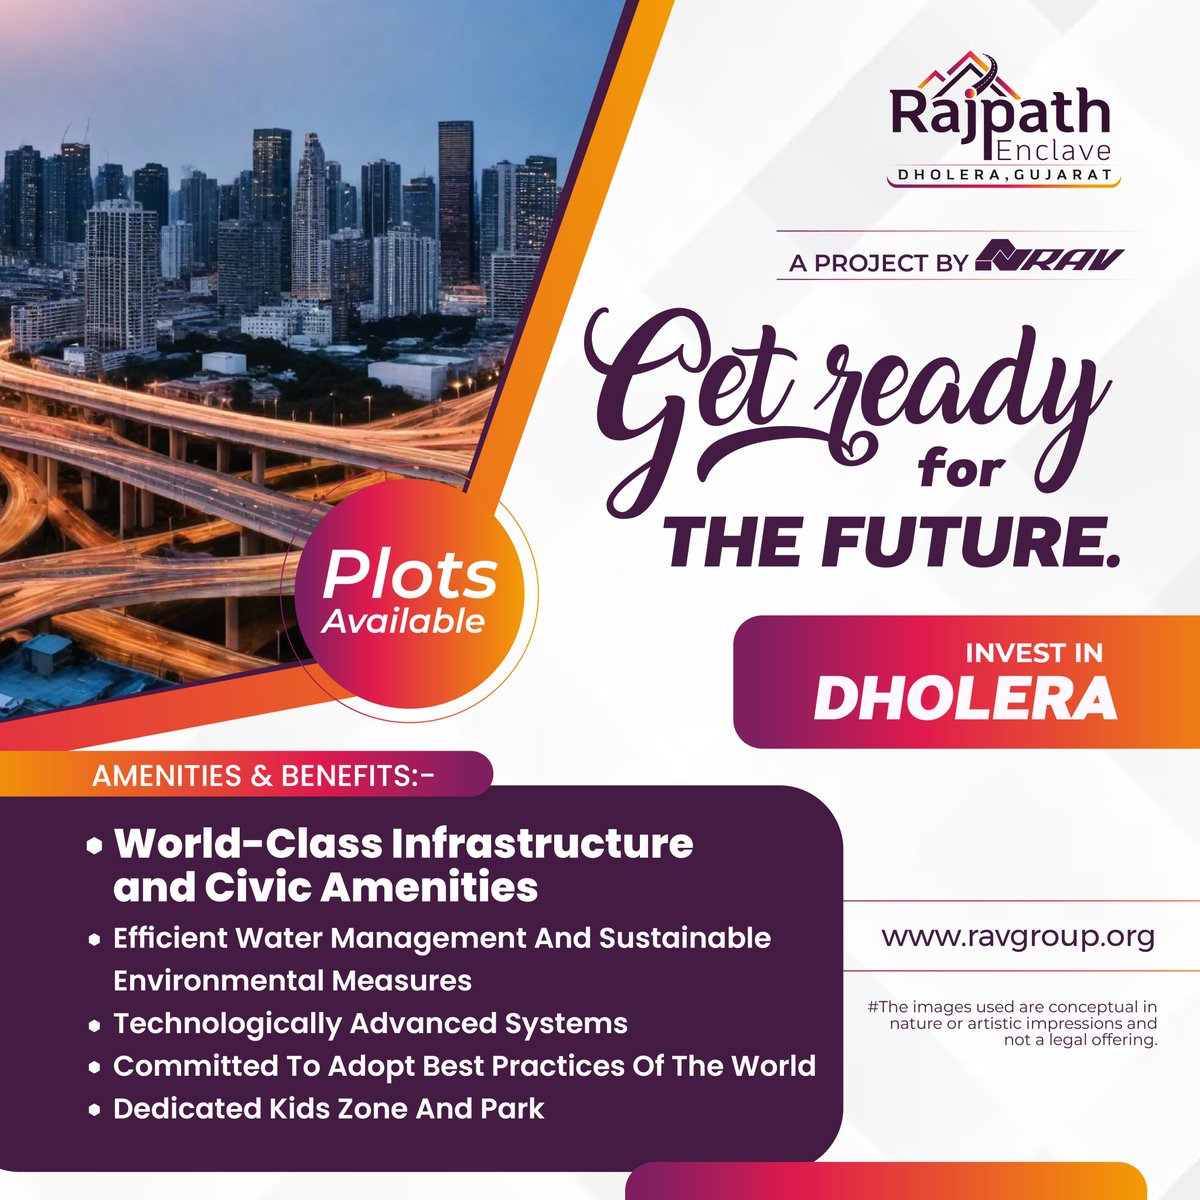 🚀 Get Ready for the future. Invest in Dholera, Plots available here. 🏞️

🌐Visit Us: ravgroup.org
☎️ Call: 092054 40544

#FutureInvestments #DholeraDreams #SustainableCity #SmartInvestments #GreenInfrastructure #InnovationHub #DholeraPlots #FutureReadyLiving #ravgroup